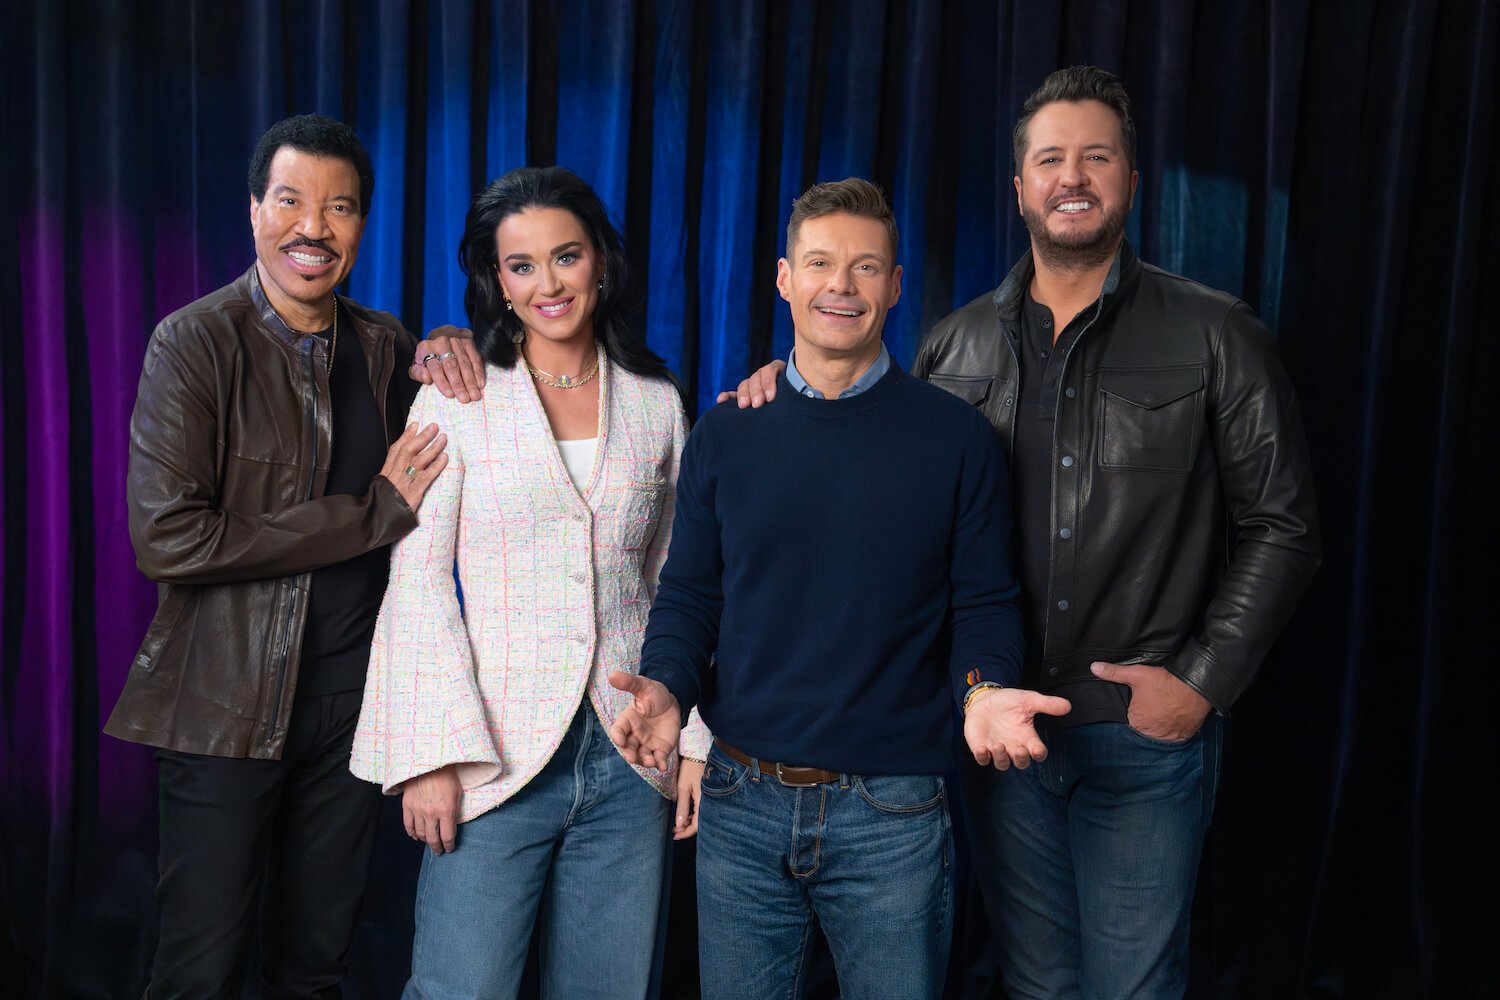 Lionel Richie, Katy Perry, Ryan Seacrest, and Luke Bryan from 'American Idol' Season 22 standing together and smiling